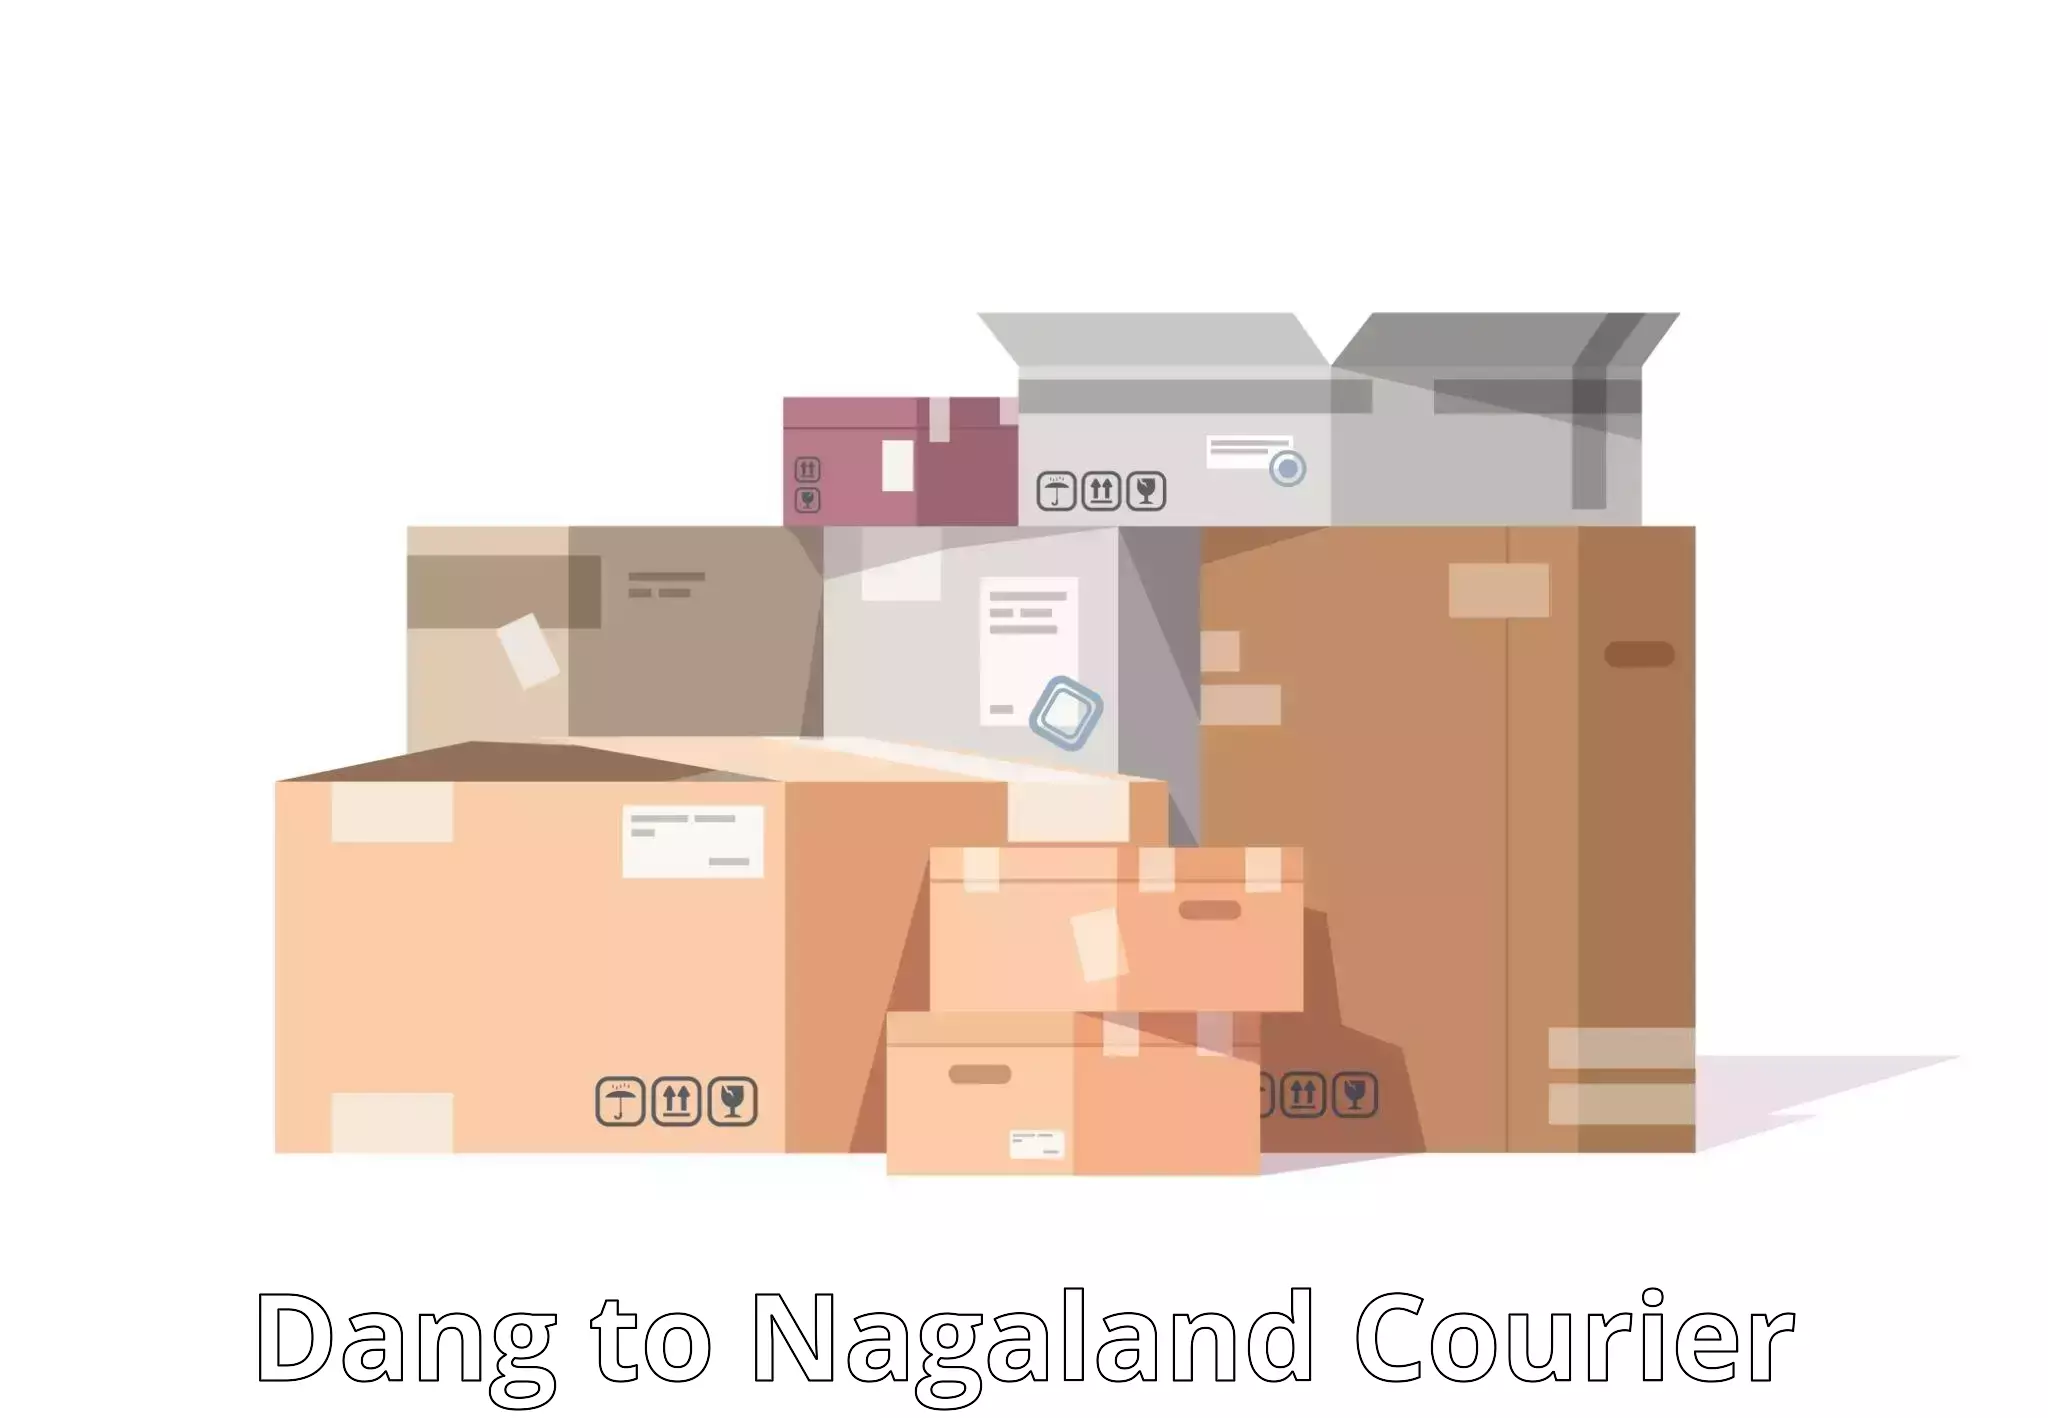 Next-day delivery options Dang to NIT Nagaland